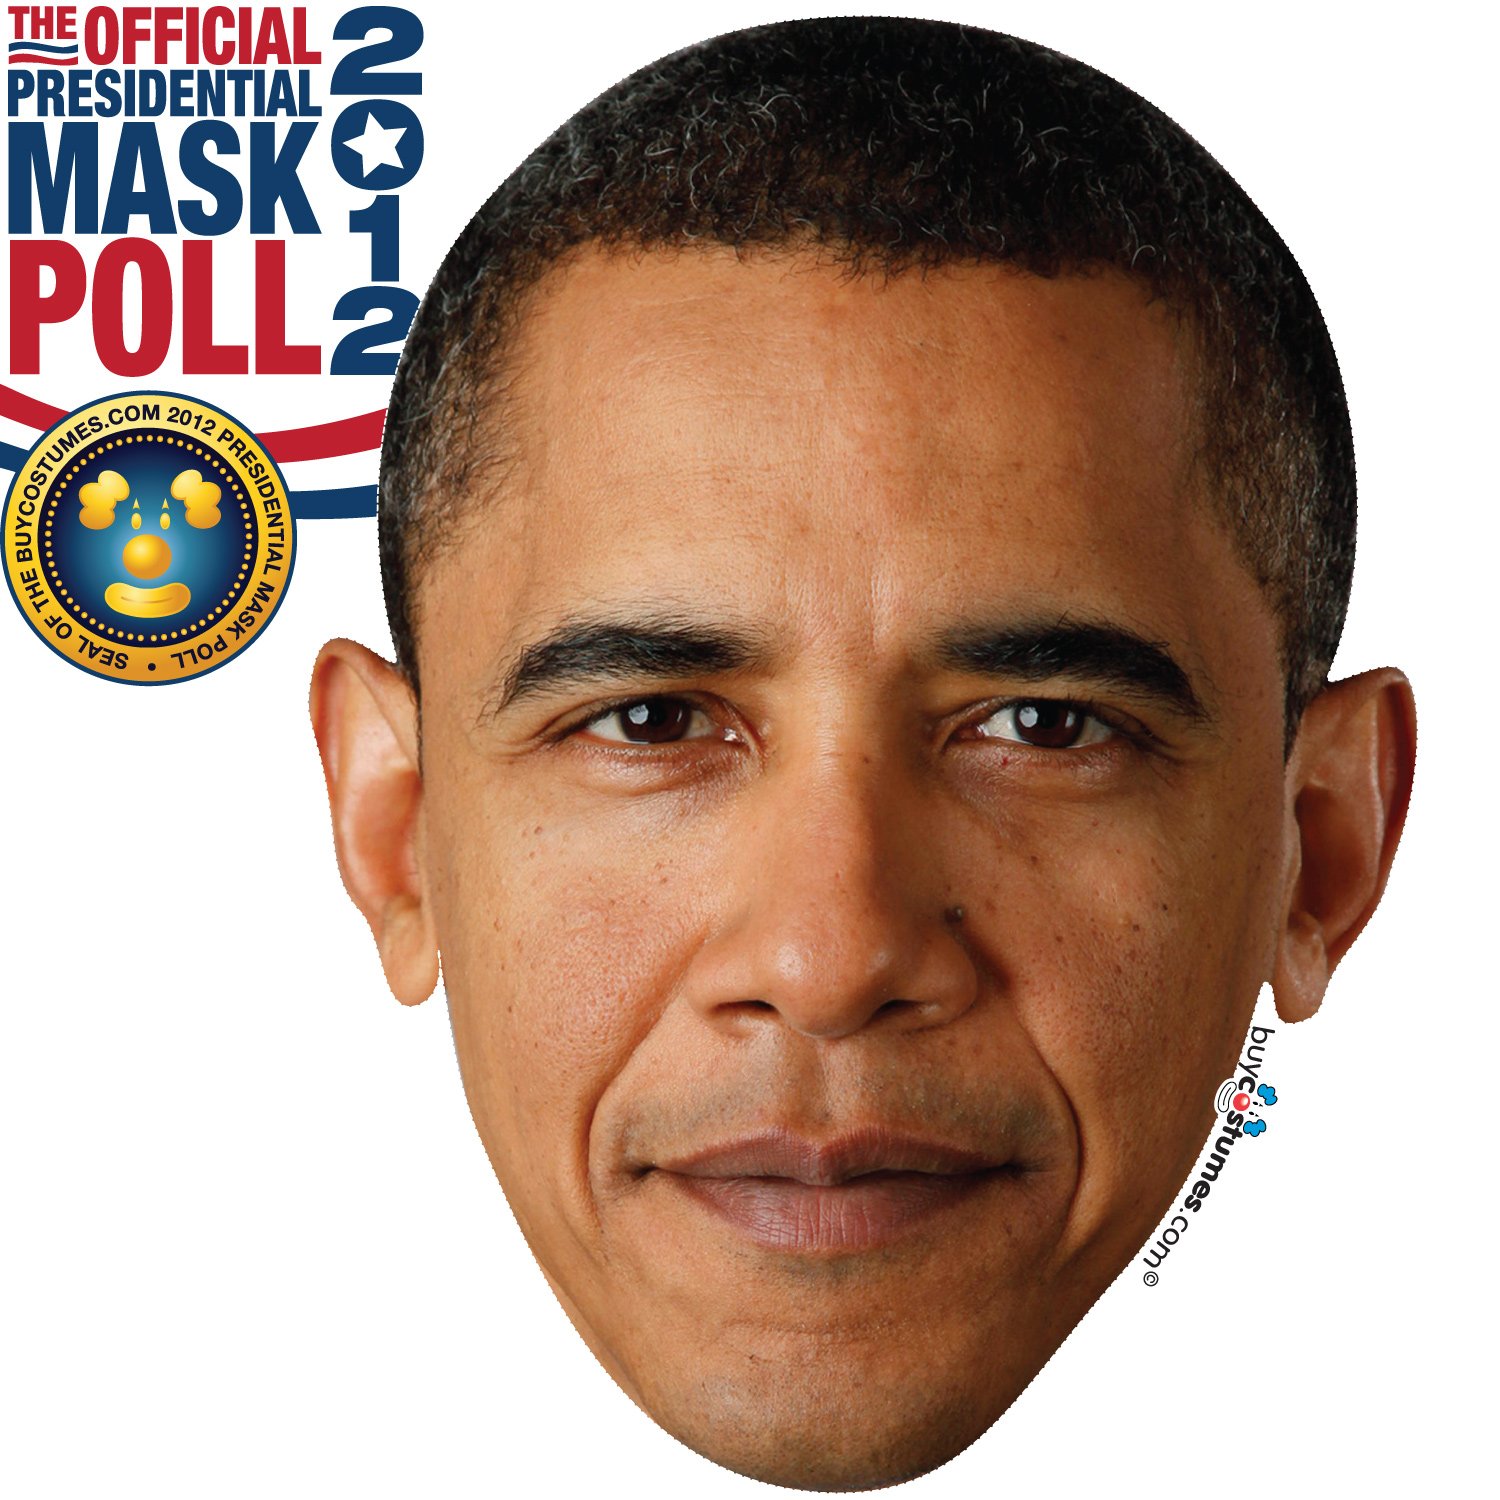 Sales of Paper Masks on BuyCostumes.com Predict GOP Nominee, Next President1500 x 1500